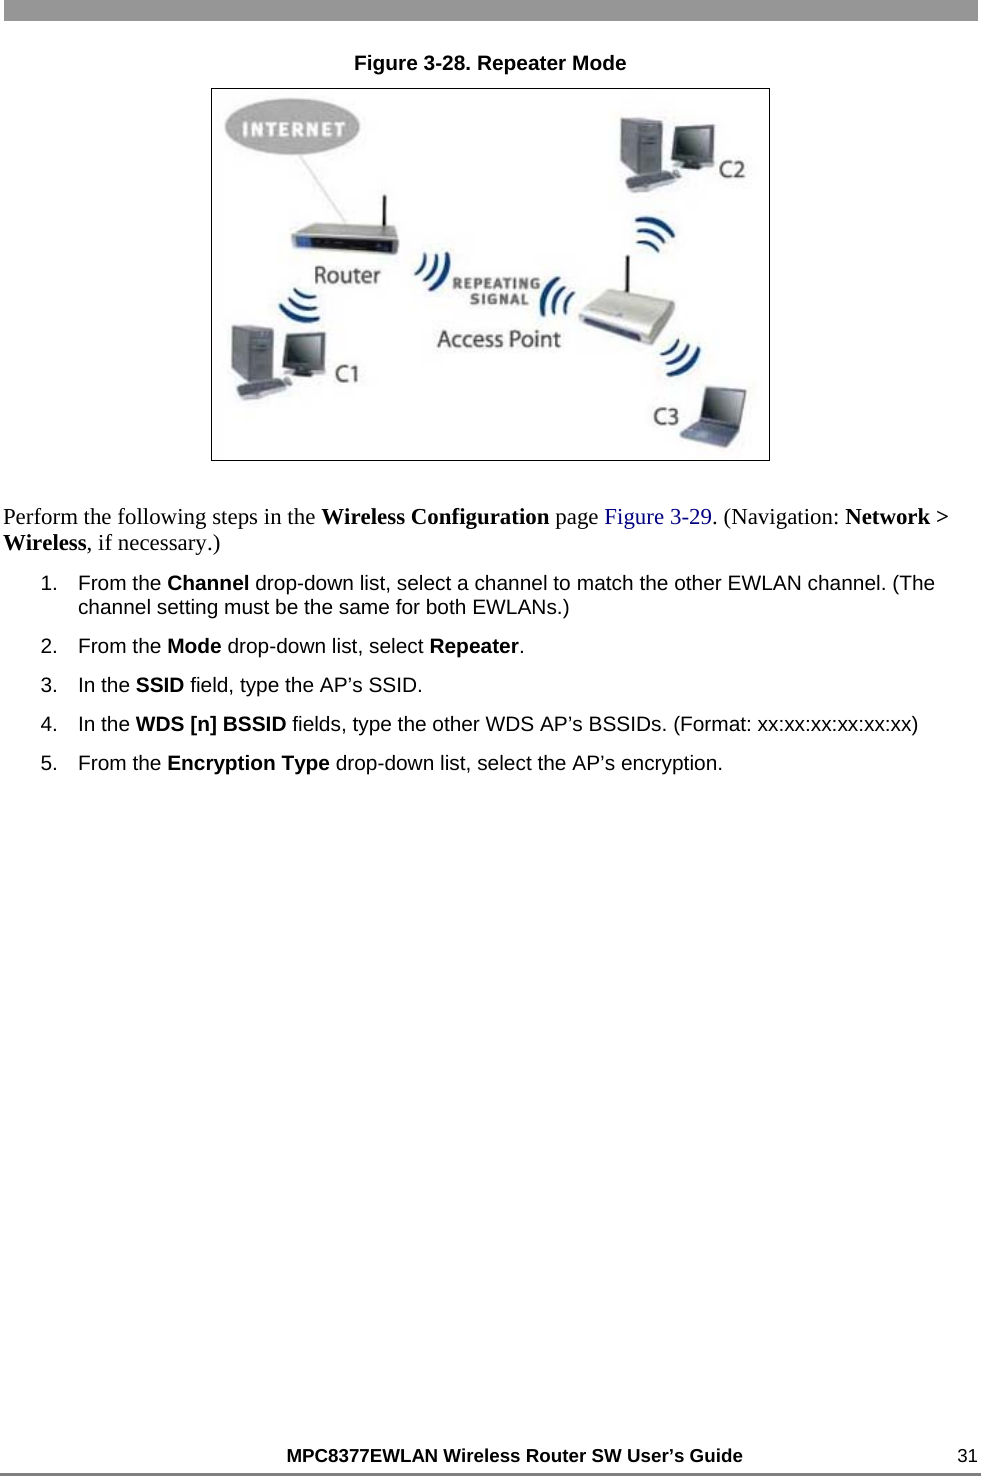                                                          MPC8377EWLAN Wireless Router SW User’s Guide    31 Figure 3-28. Repeater Mode  Perform the following steps in the Wireless Configuration page Figure 3-29. (Navigation: Network &gt; Wireless, if necessary.) 1. From the Channel drop-down list, select a channel to match the other EWLAN channel. (The channel setting must be the same for both EWLANs.) 2. From the Mode drop-down list, select Repeater. 3. In the SSID field, type the AP’s SSID. 4. In the WDS [n] BSSID fields, type the other WDS AP’s BSSIDs. (Format: xx:xx:xx:xx:xx:xx) 5. From the Encryption Type drop-down list, select the AP’s encryption. 